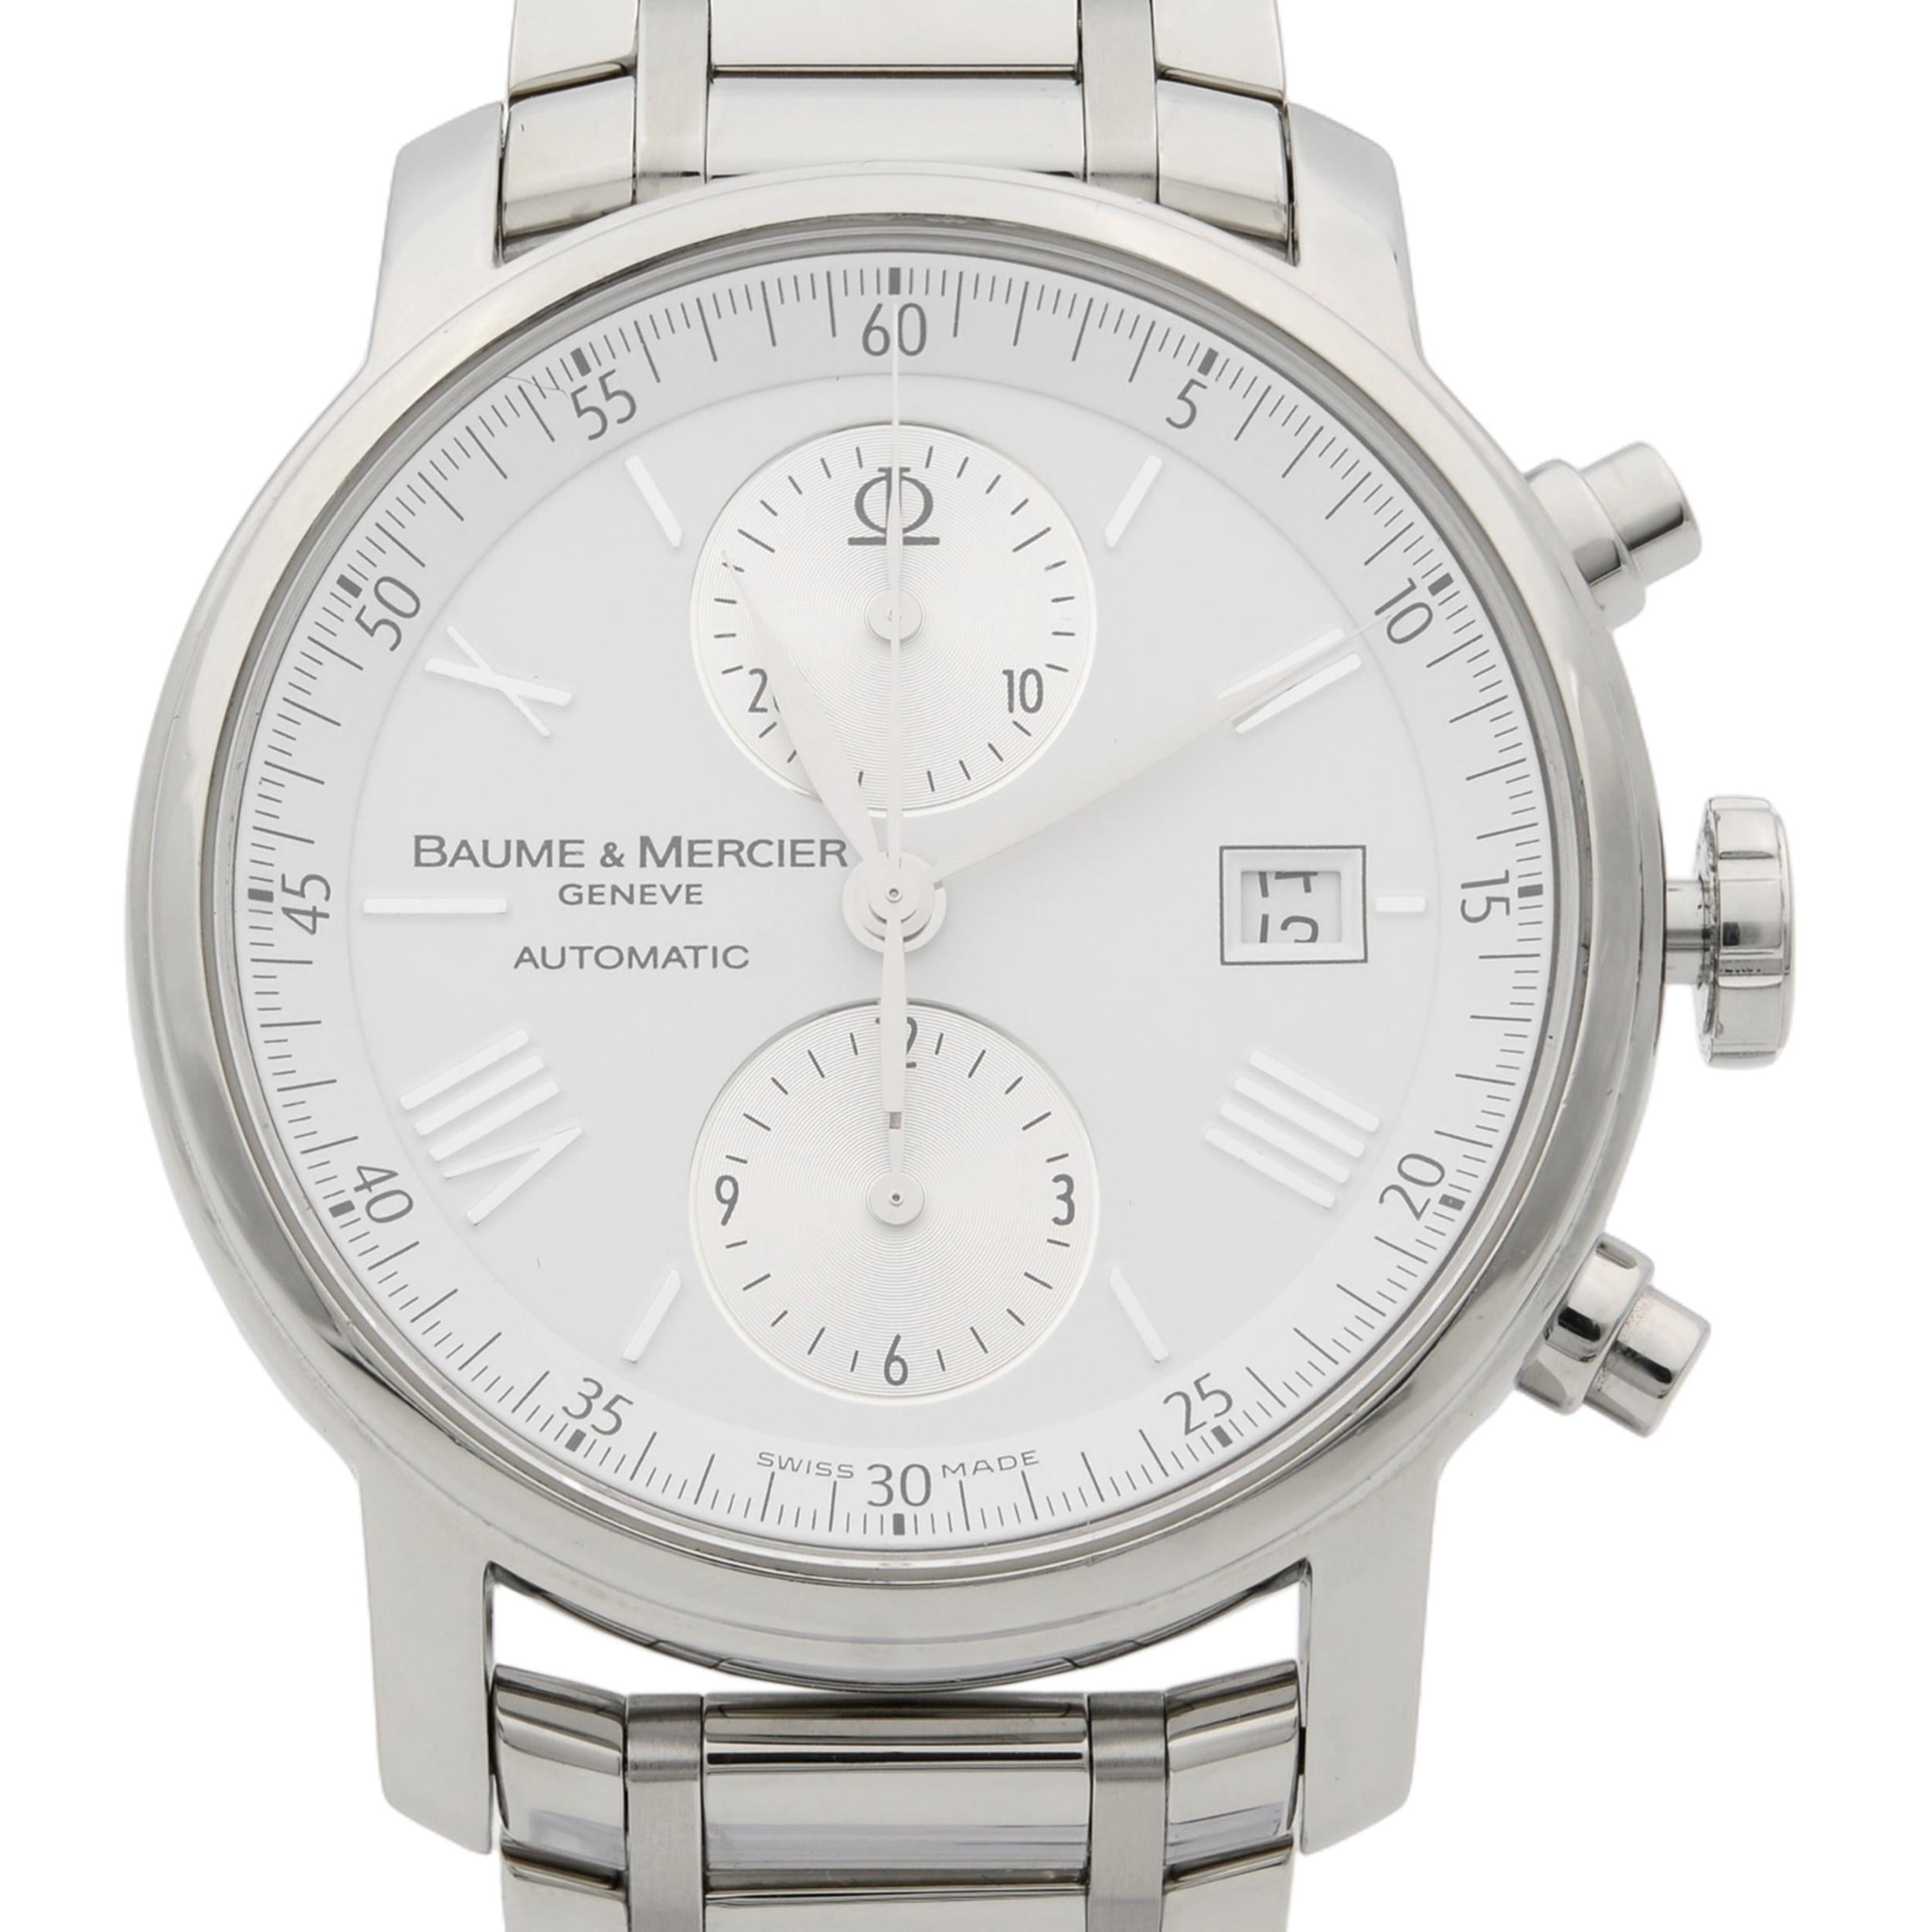 This pre-owned Baume et Mercier Classima XL 65591 is a beautiful men's timepiece that is powered by mechanical (automatic) movement which is cased in a stainless steel case. It has a round shape face, chronograph, chronograph hand, date indicator,